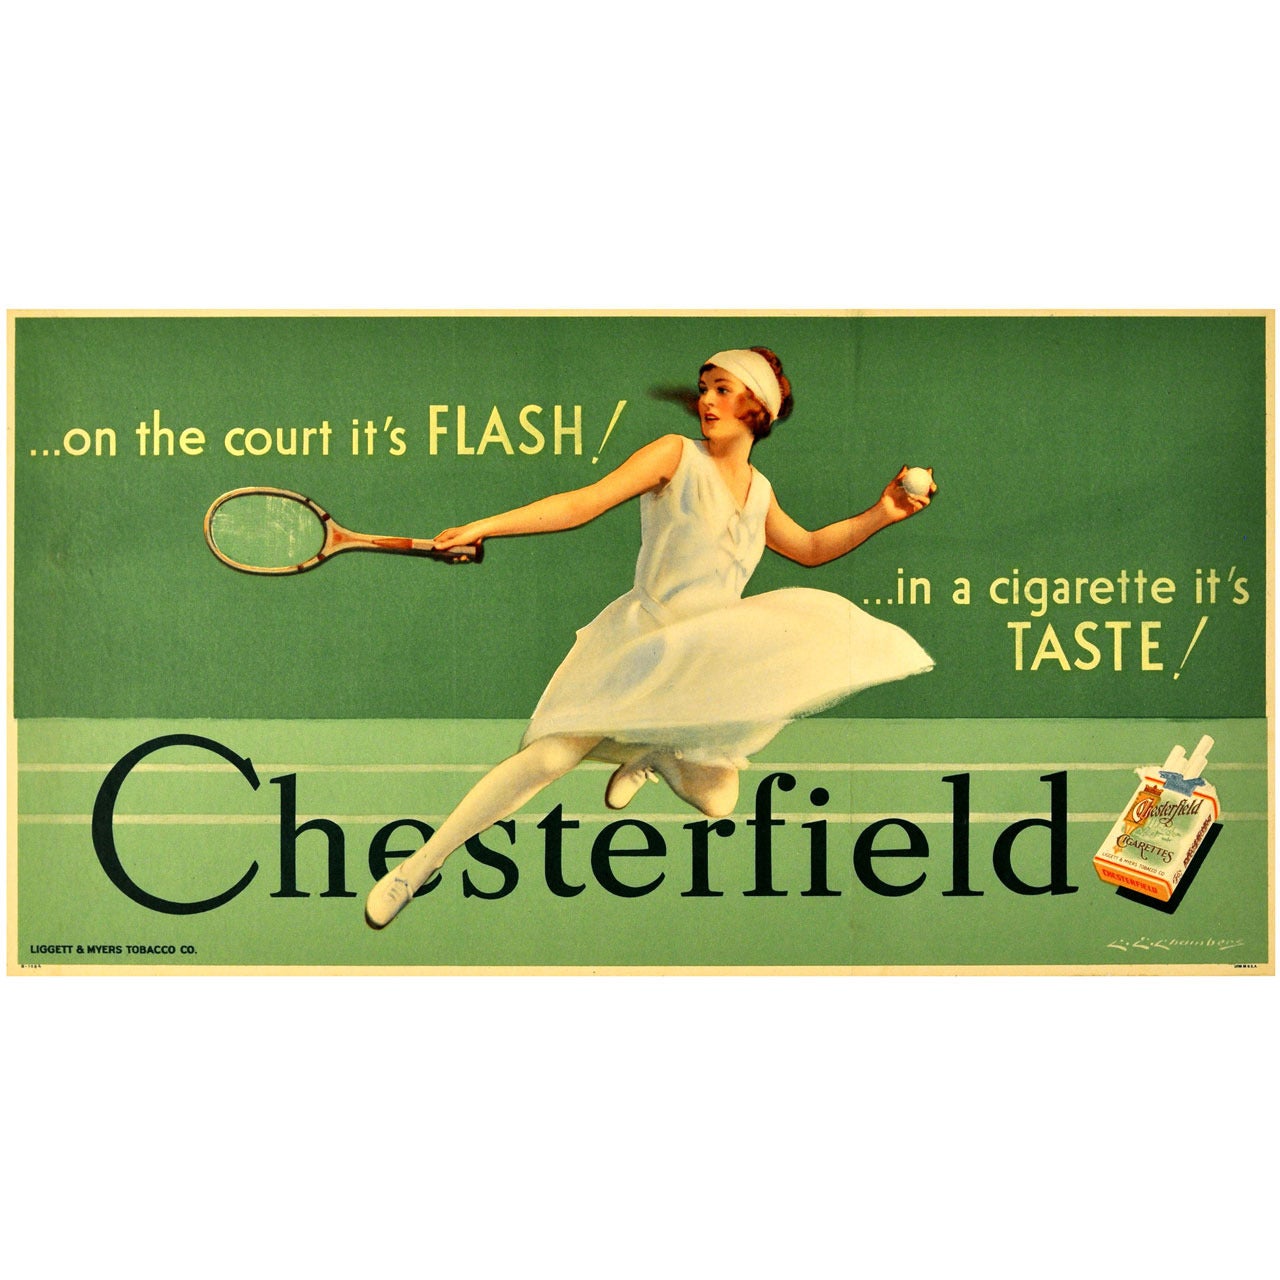 Original Vintage Poster for Chesterfield Cigarettes Featuring a Tennis Player